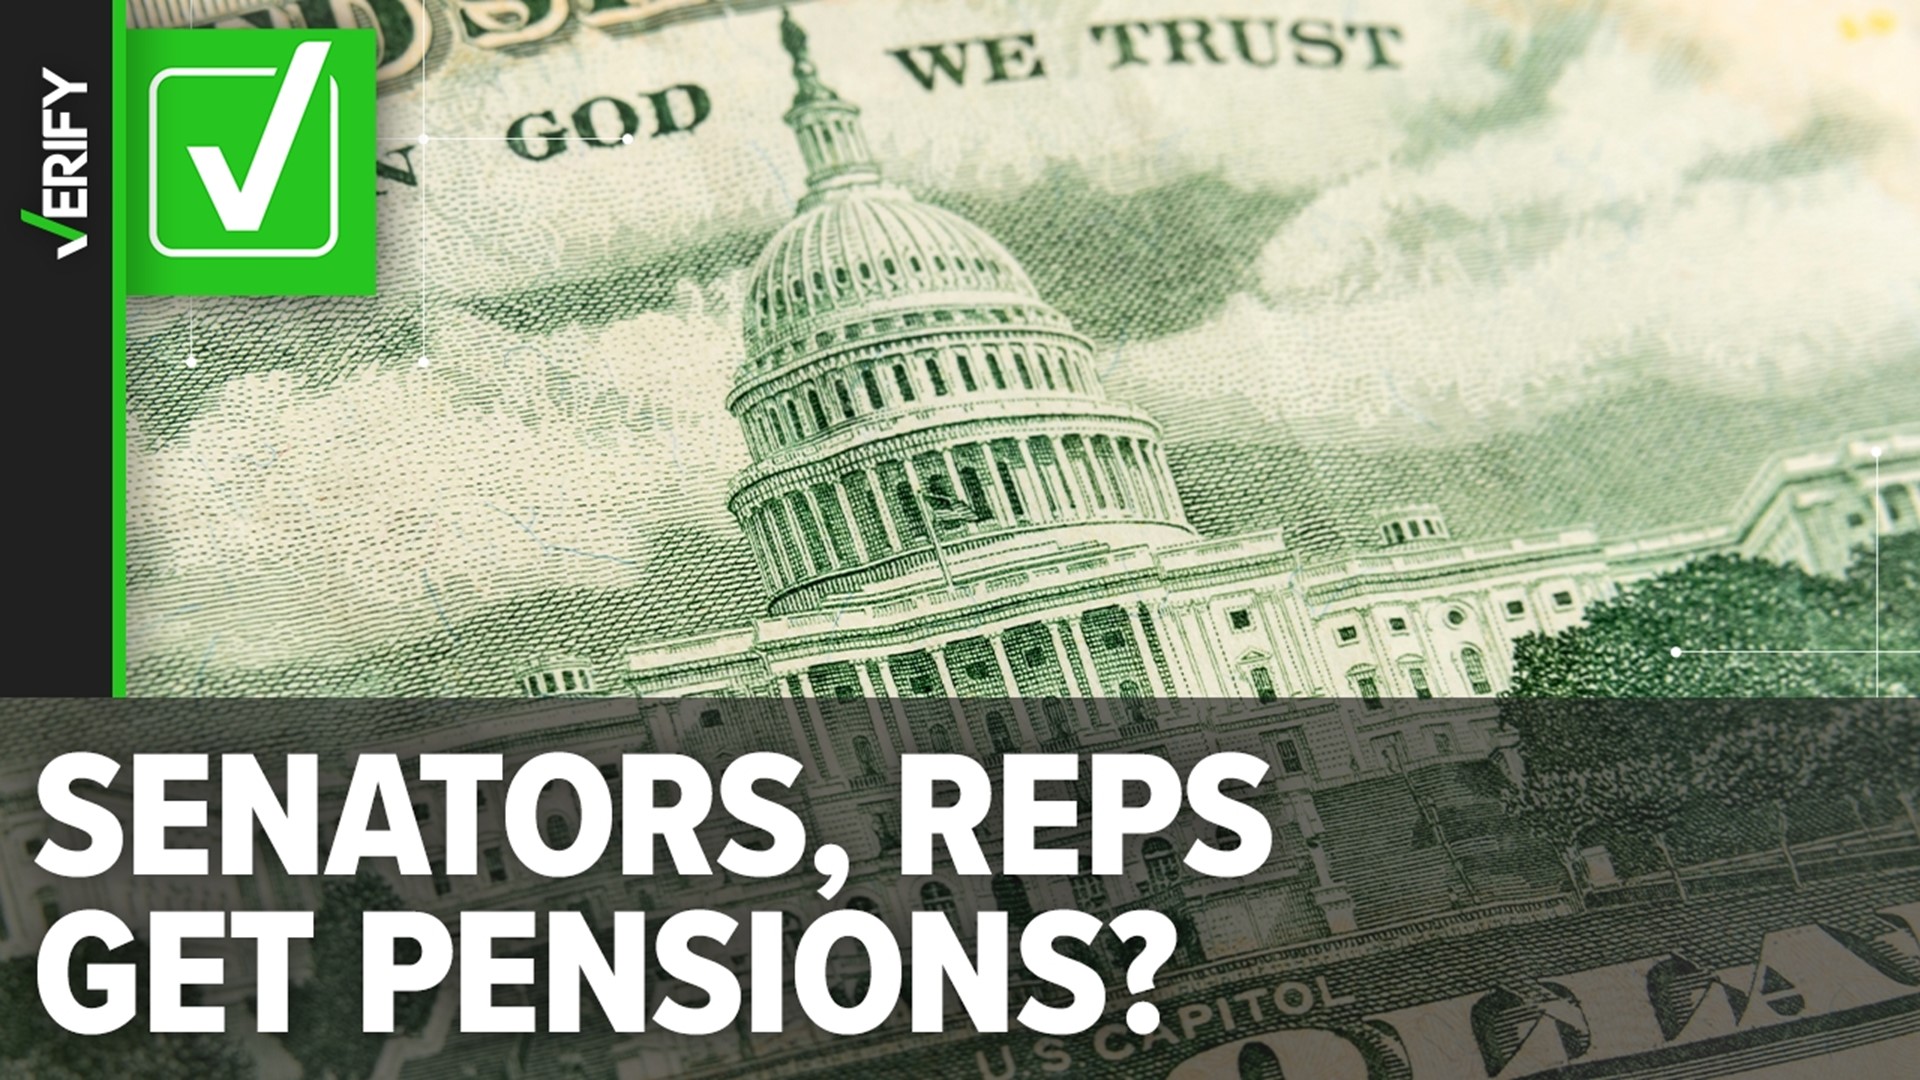 Senators and representatives are eligible for a pension if they’ve served at least 5 years in office.